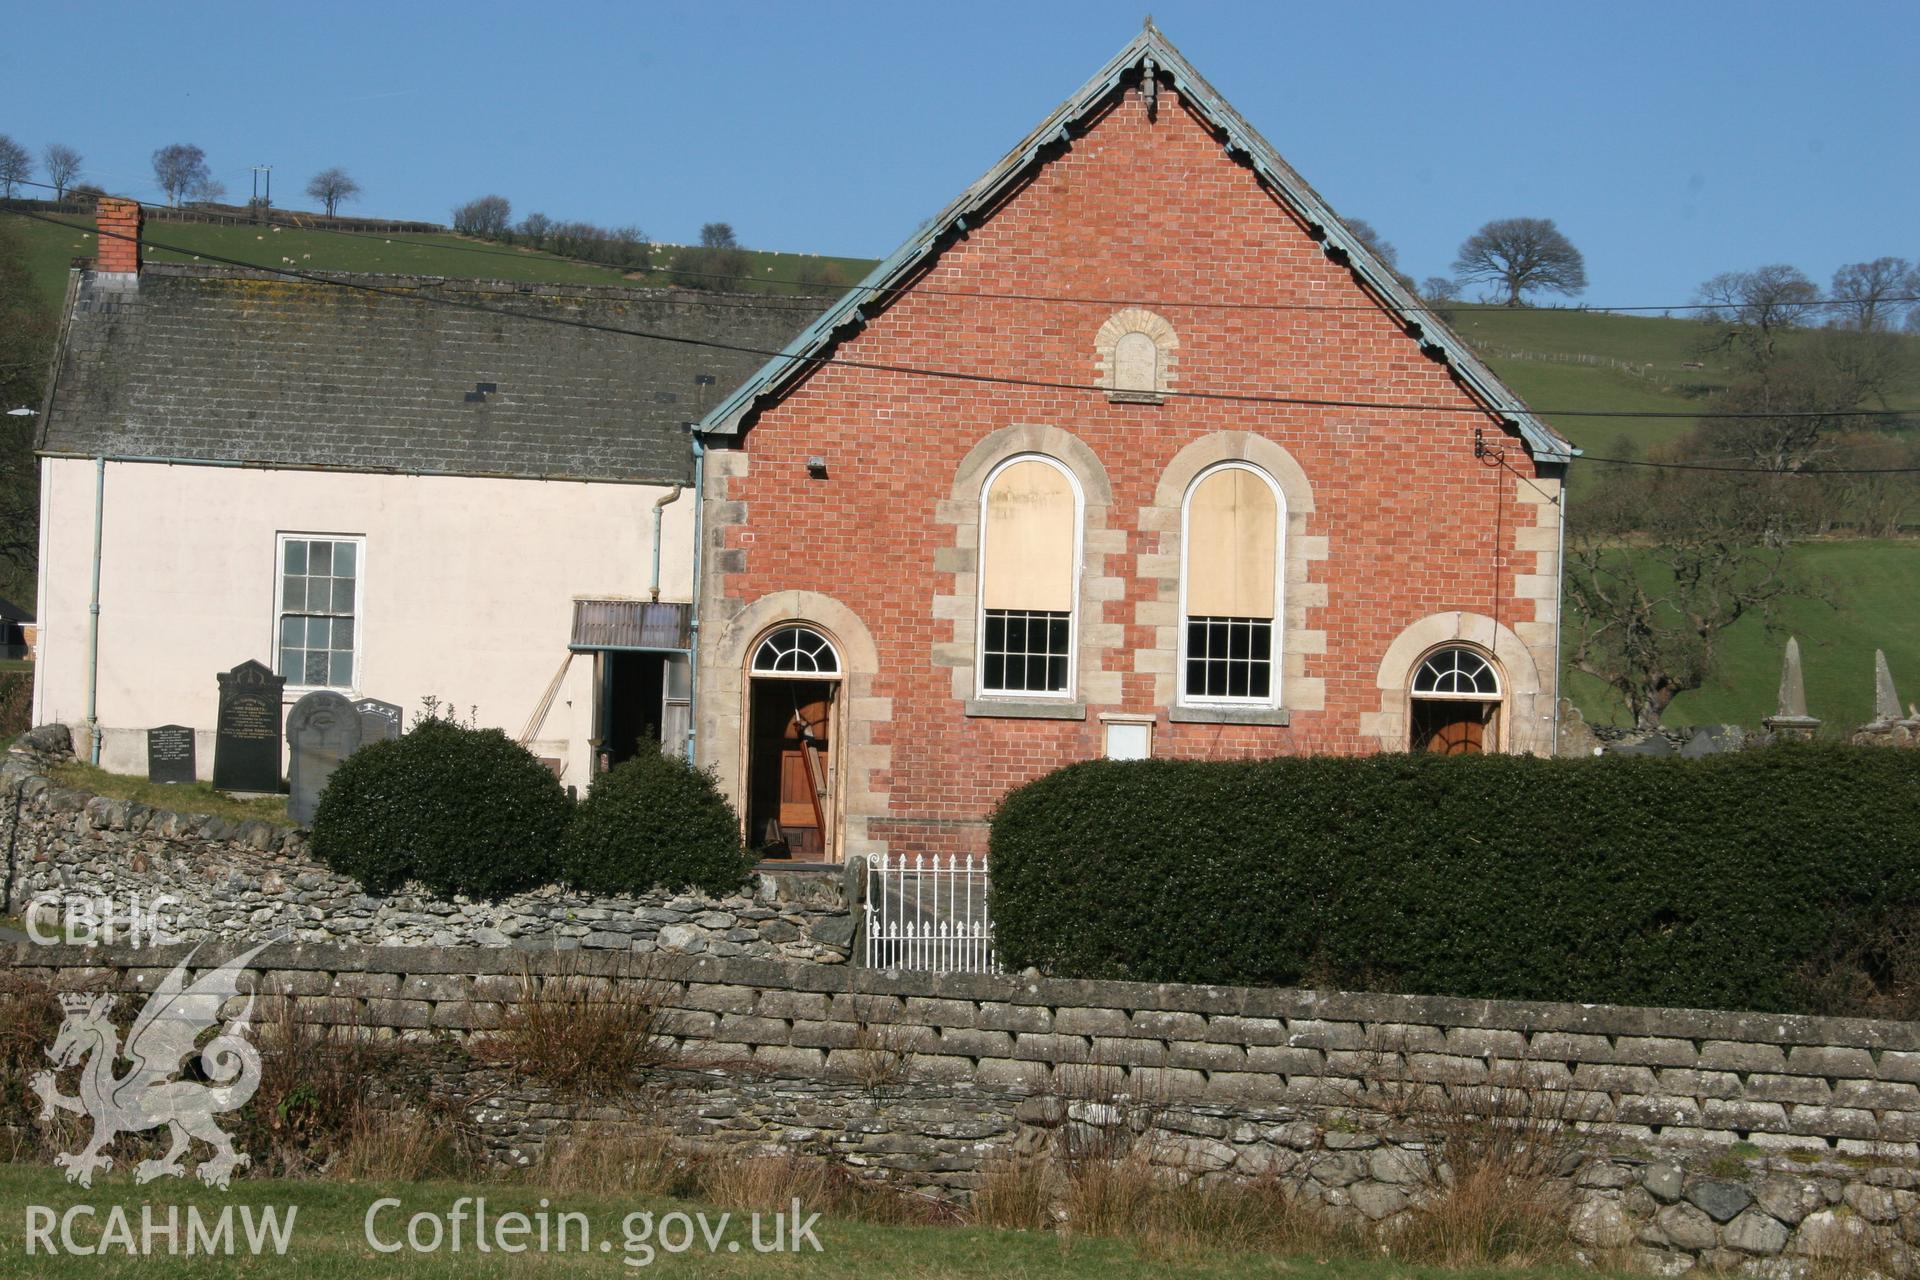 Photograph showing general exterior view of the front elevation of Llawrybettws Welsh Calvinistic Methodist chapel, Glanyrafon, Corwen. Produced by Tim Allen on 27th February 2019 to meet a condition attached to planning application.